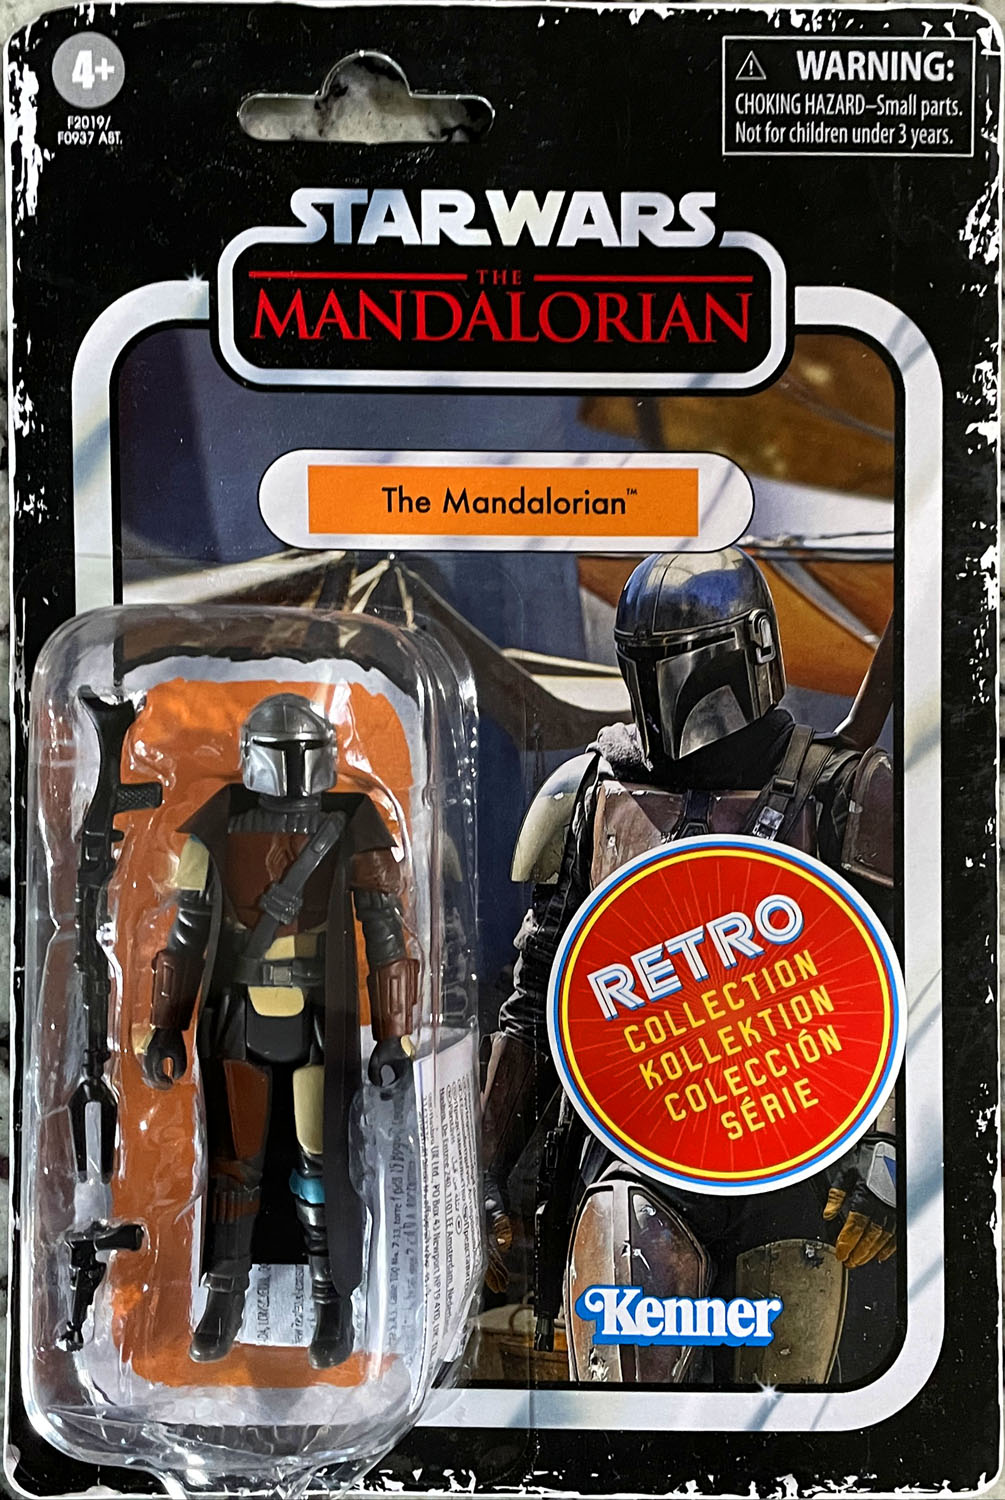 The Mandalorian - Kenner/Hasbro (Star Wars Retro Collection) action figure collectible - Main Image 1